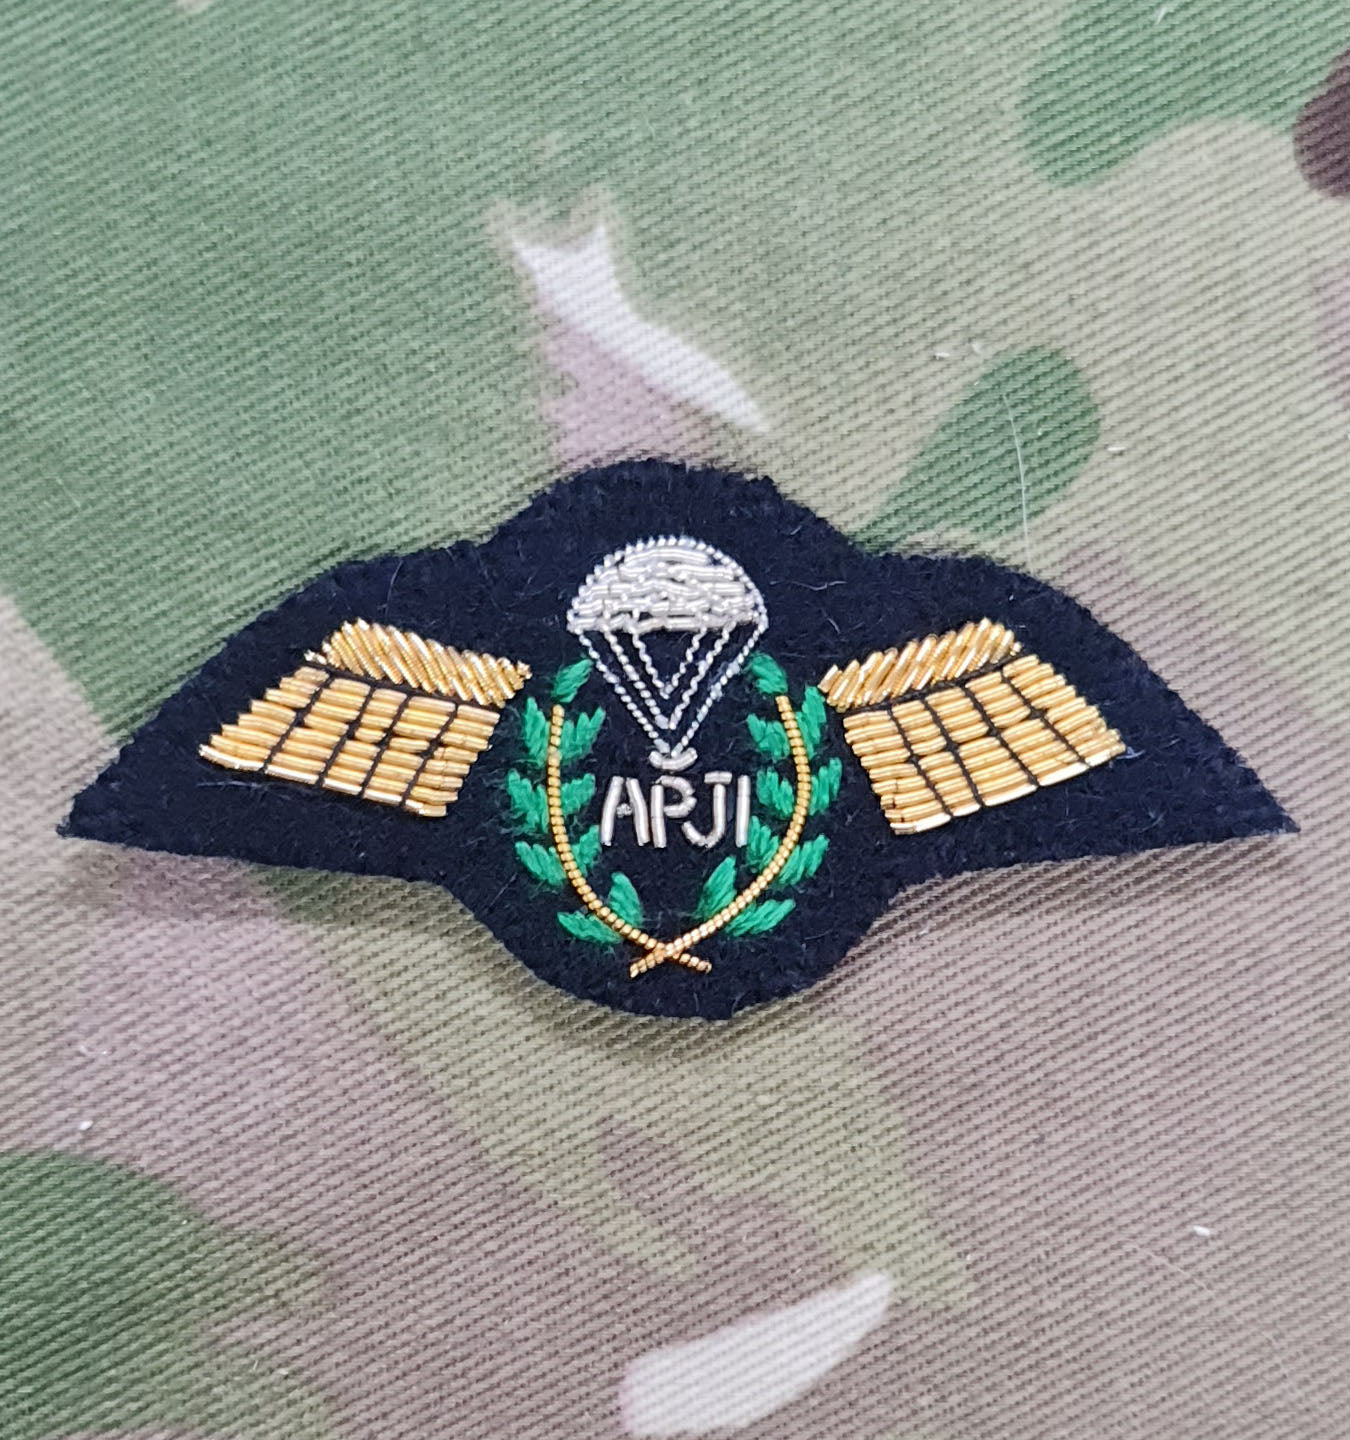 British Parachutist qualification Assistant Parachute Jump Instructor APJI Jump Wings Wire Bullion Embroidered Badge gold on black mess dress